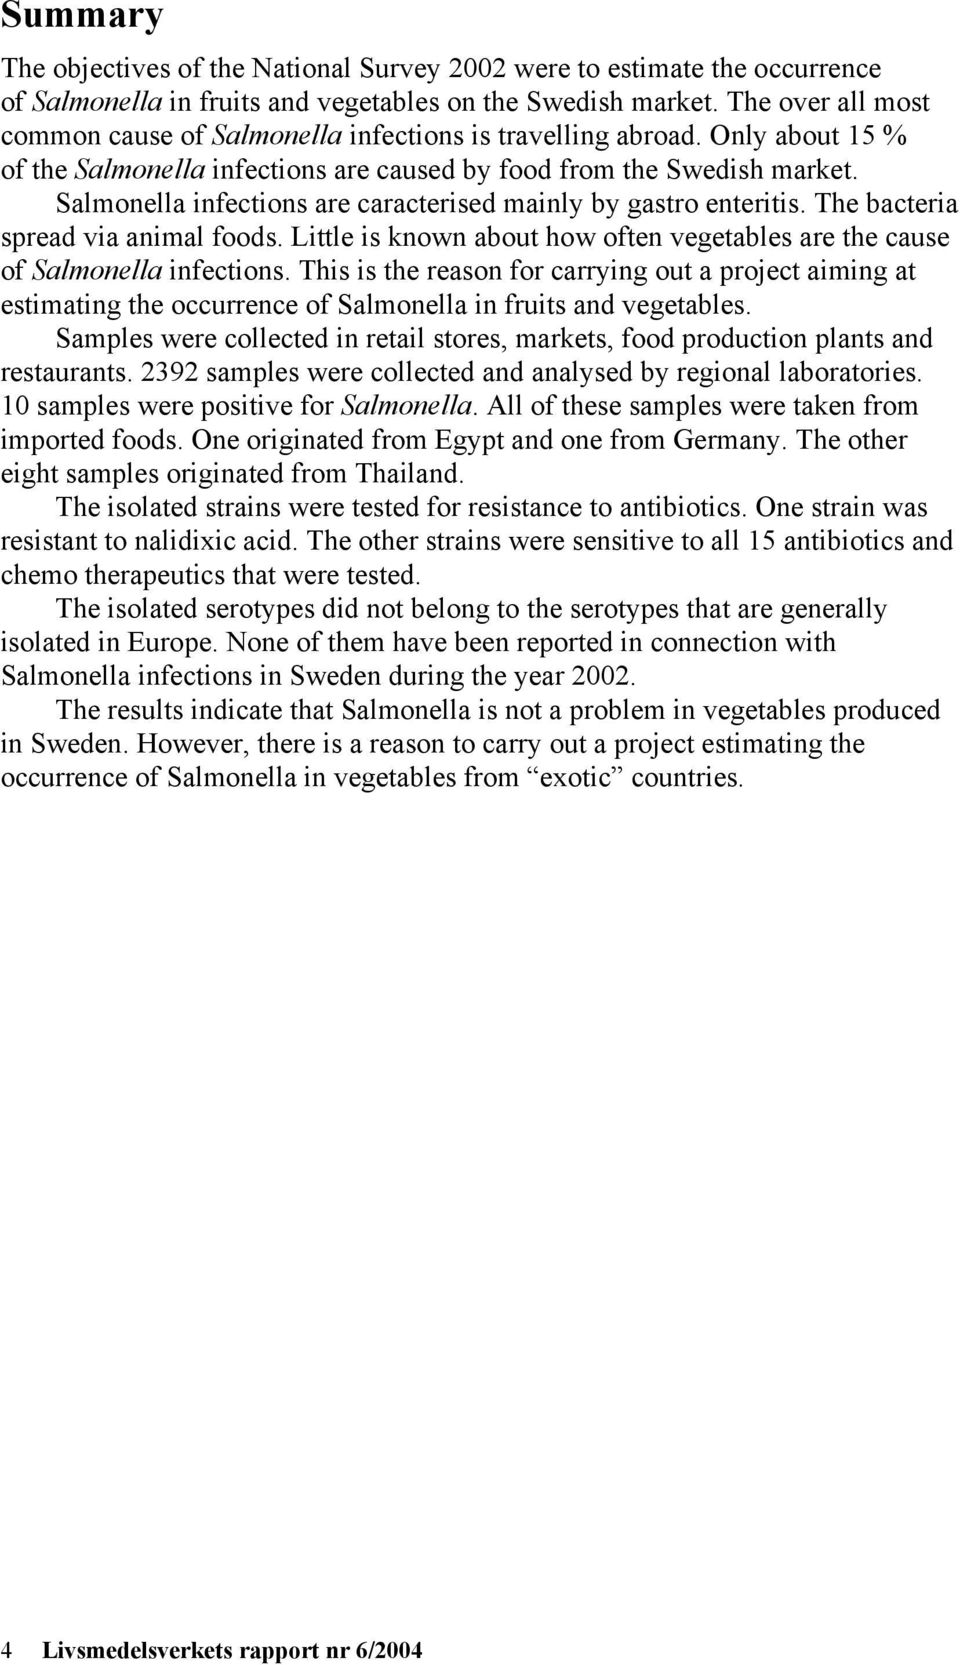 Salmonella infections are caracterised mainly by gastro enteritis. The bacteria spread via animal foods. Little is known about how often vegetables are the cause of Salmonella infections.